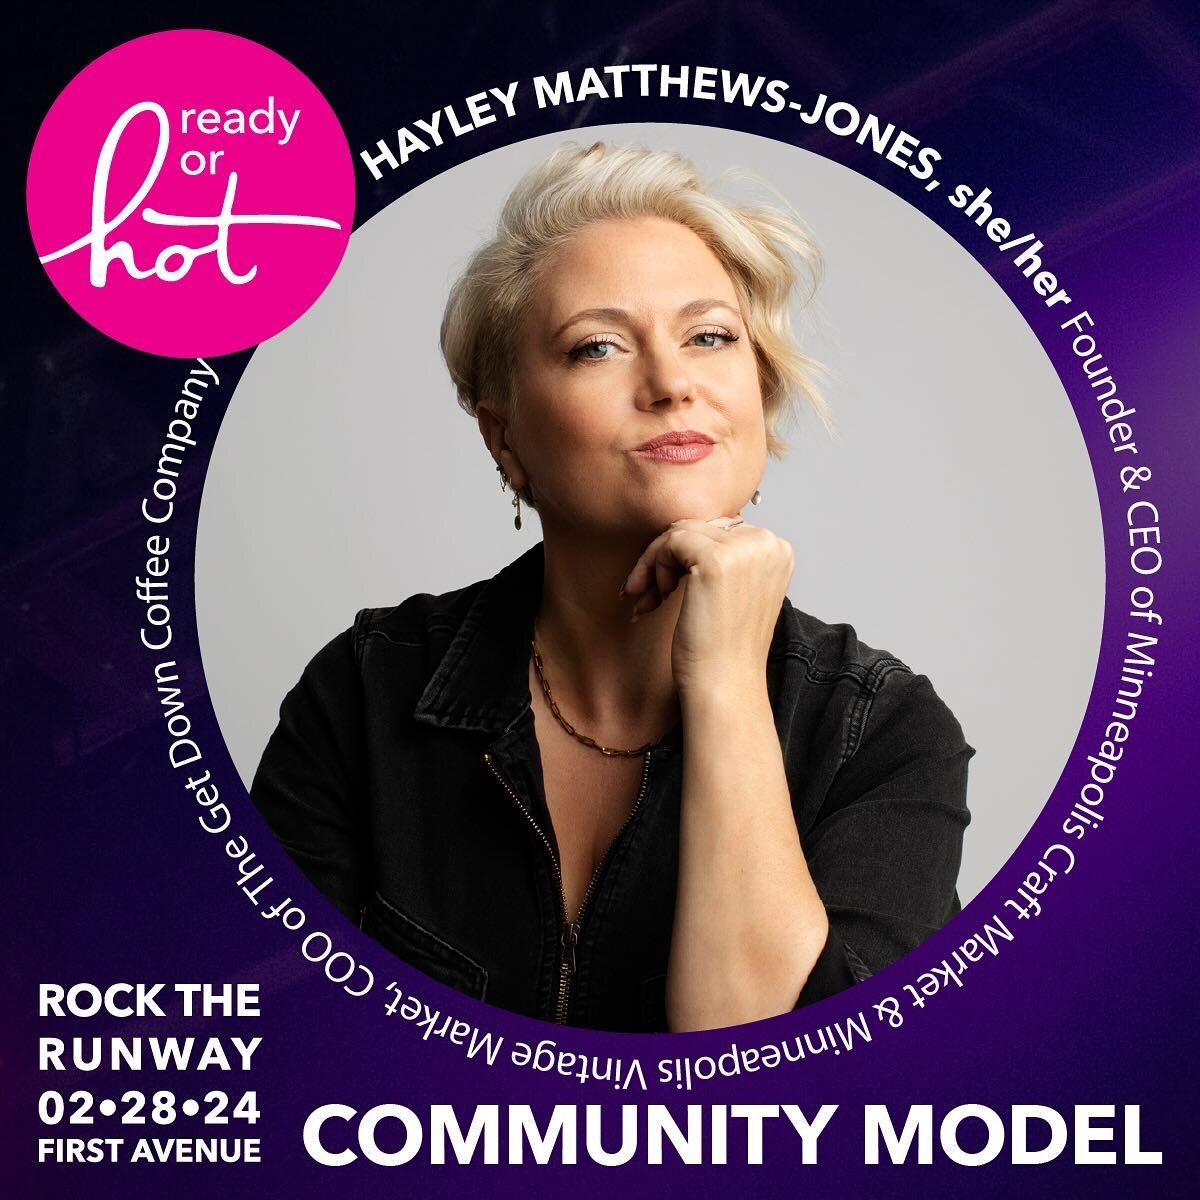 I&rsquo;m thrilled to announce I&rsquo;ll be walking the runway on February 28 at @firstavenue at 🔥Ready or Hot: Rock the Runway🔥 &mdash;a radically inclusive, body-positive fashion show celebrating bold self-expression, the beauty and power of our